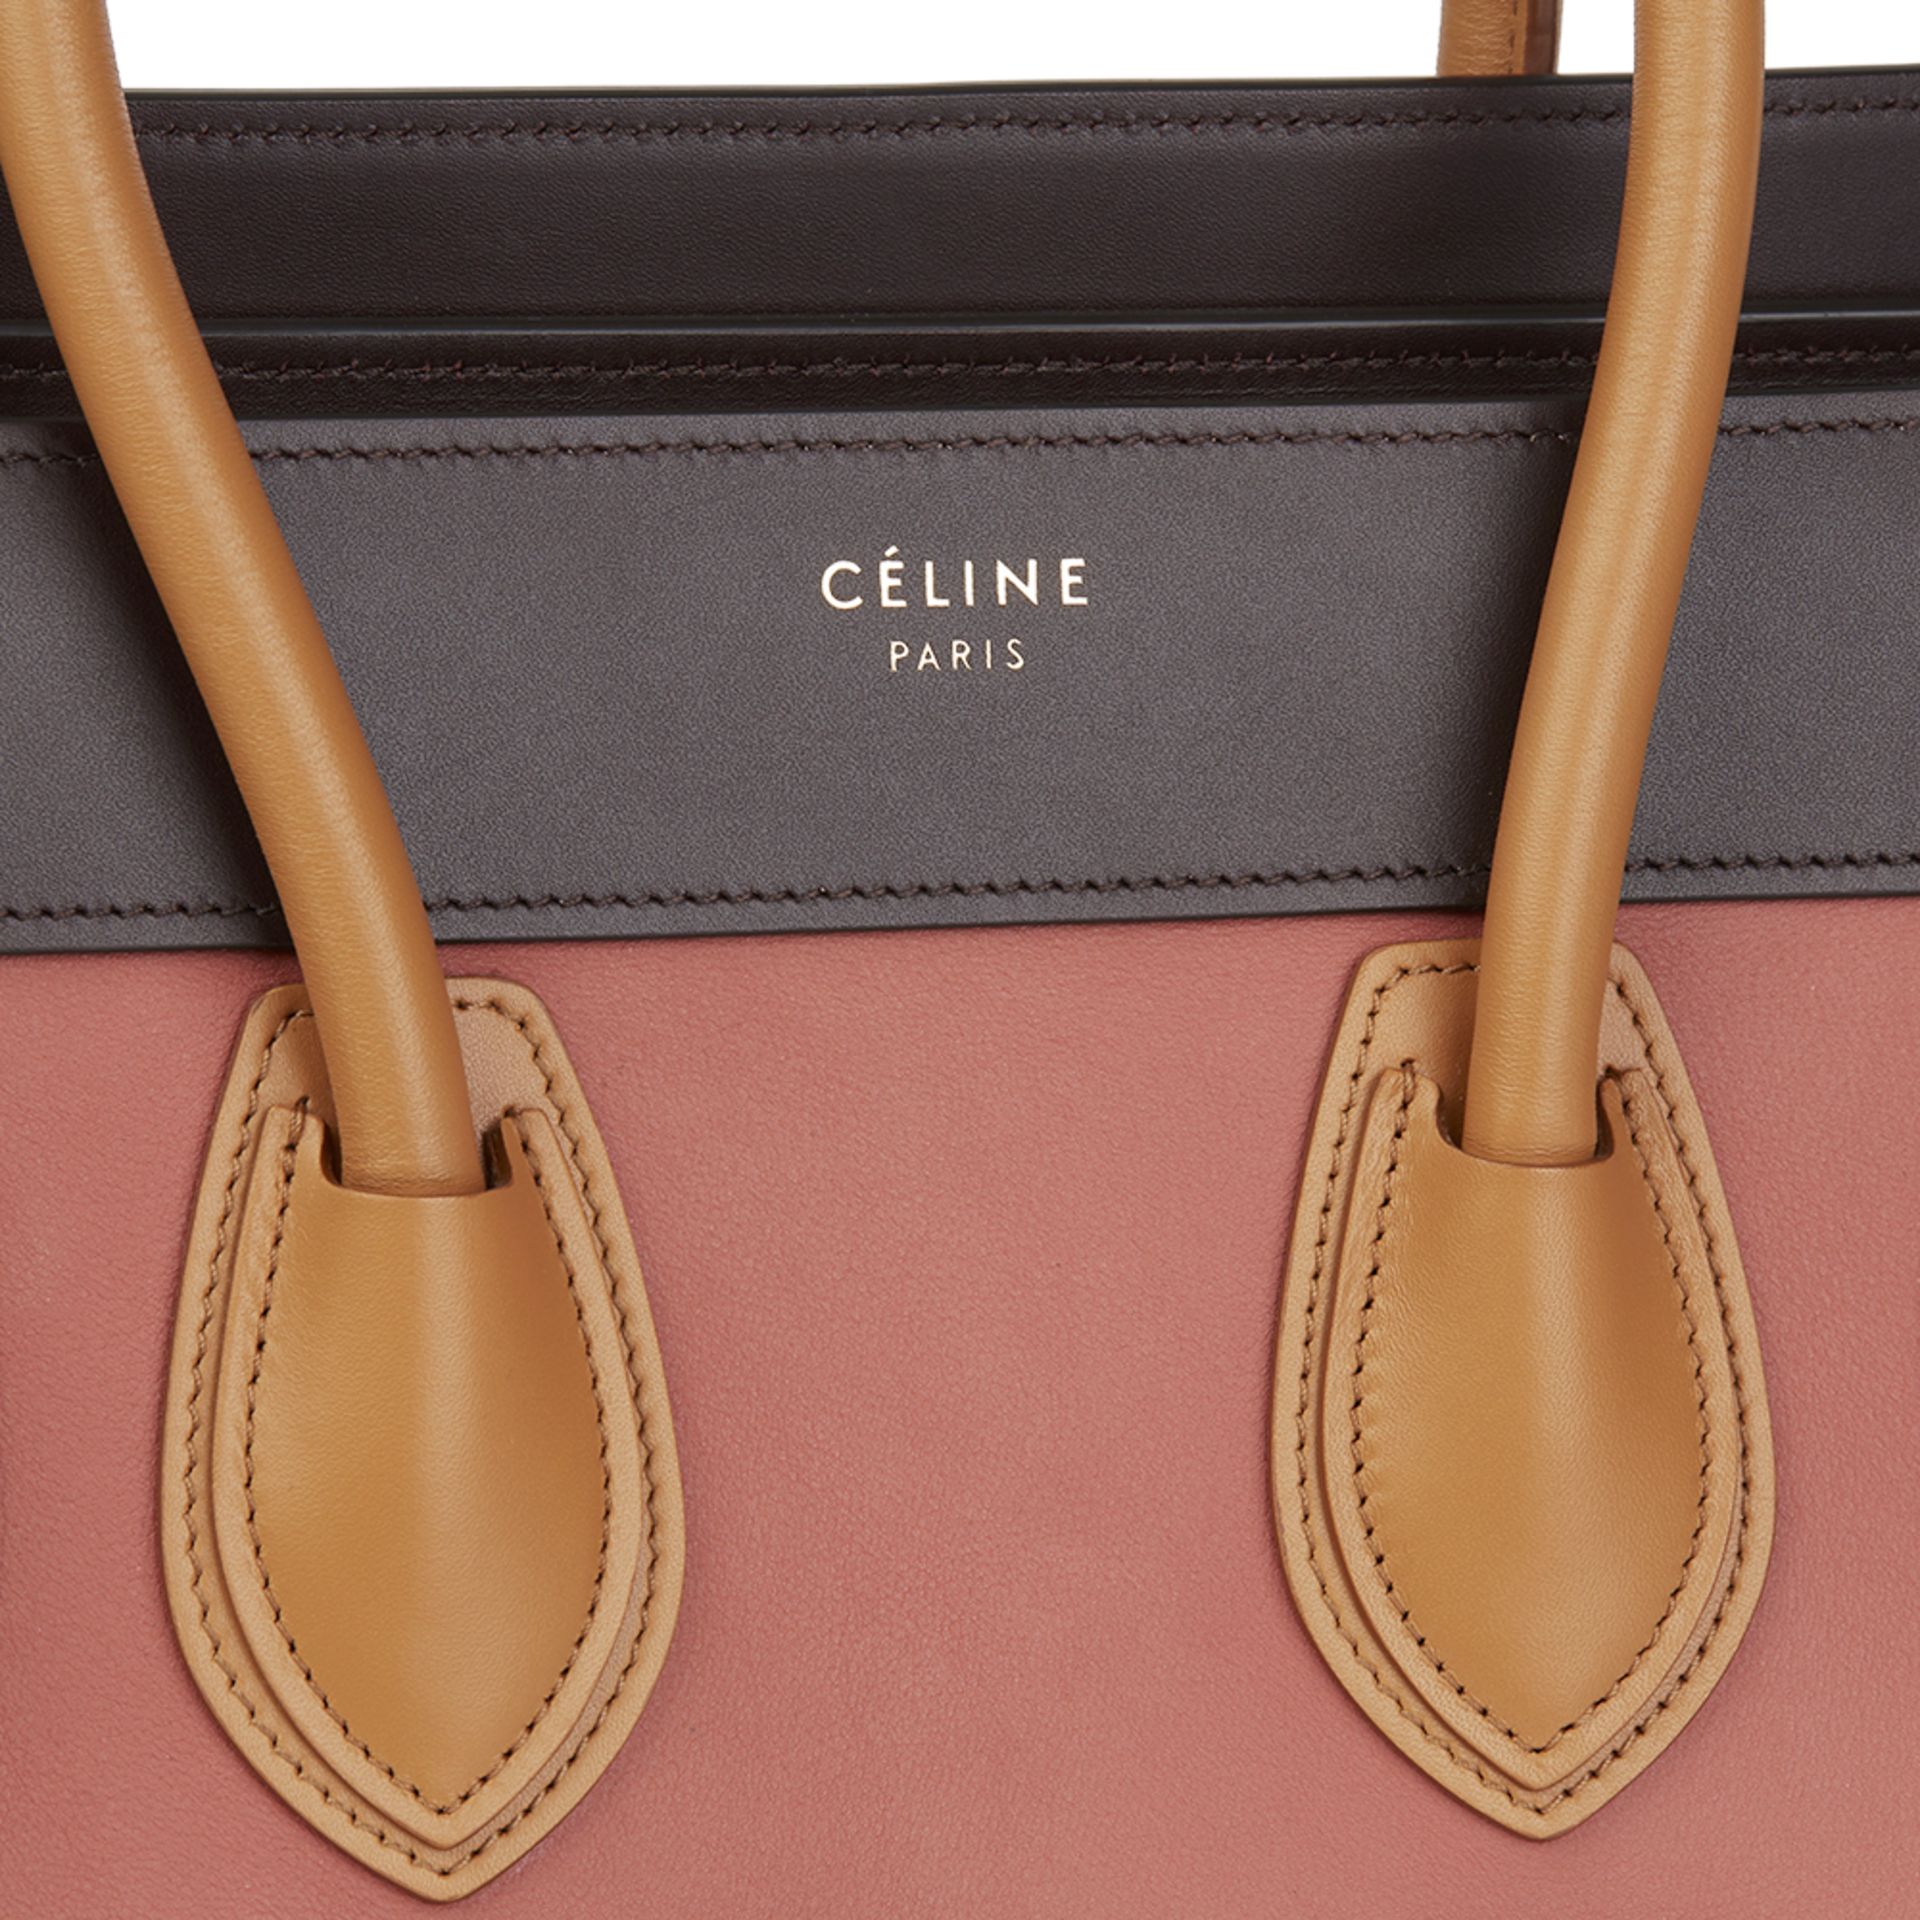 Céline Terracotta Smooth & Elephant Calfskin Leather Micro Luggage Tote - Image 6 of 10